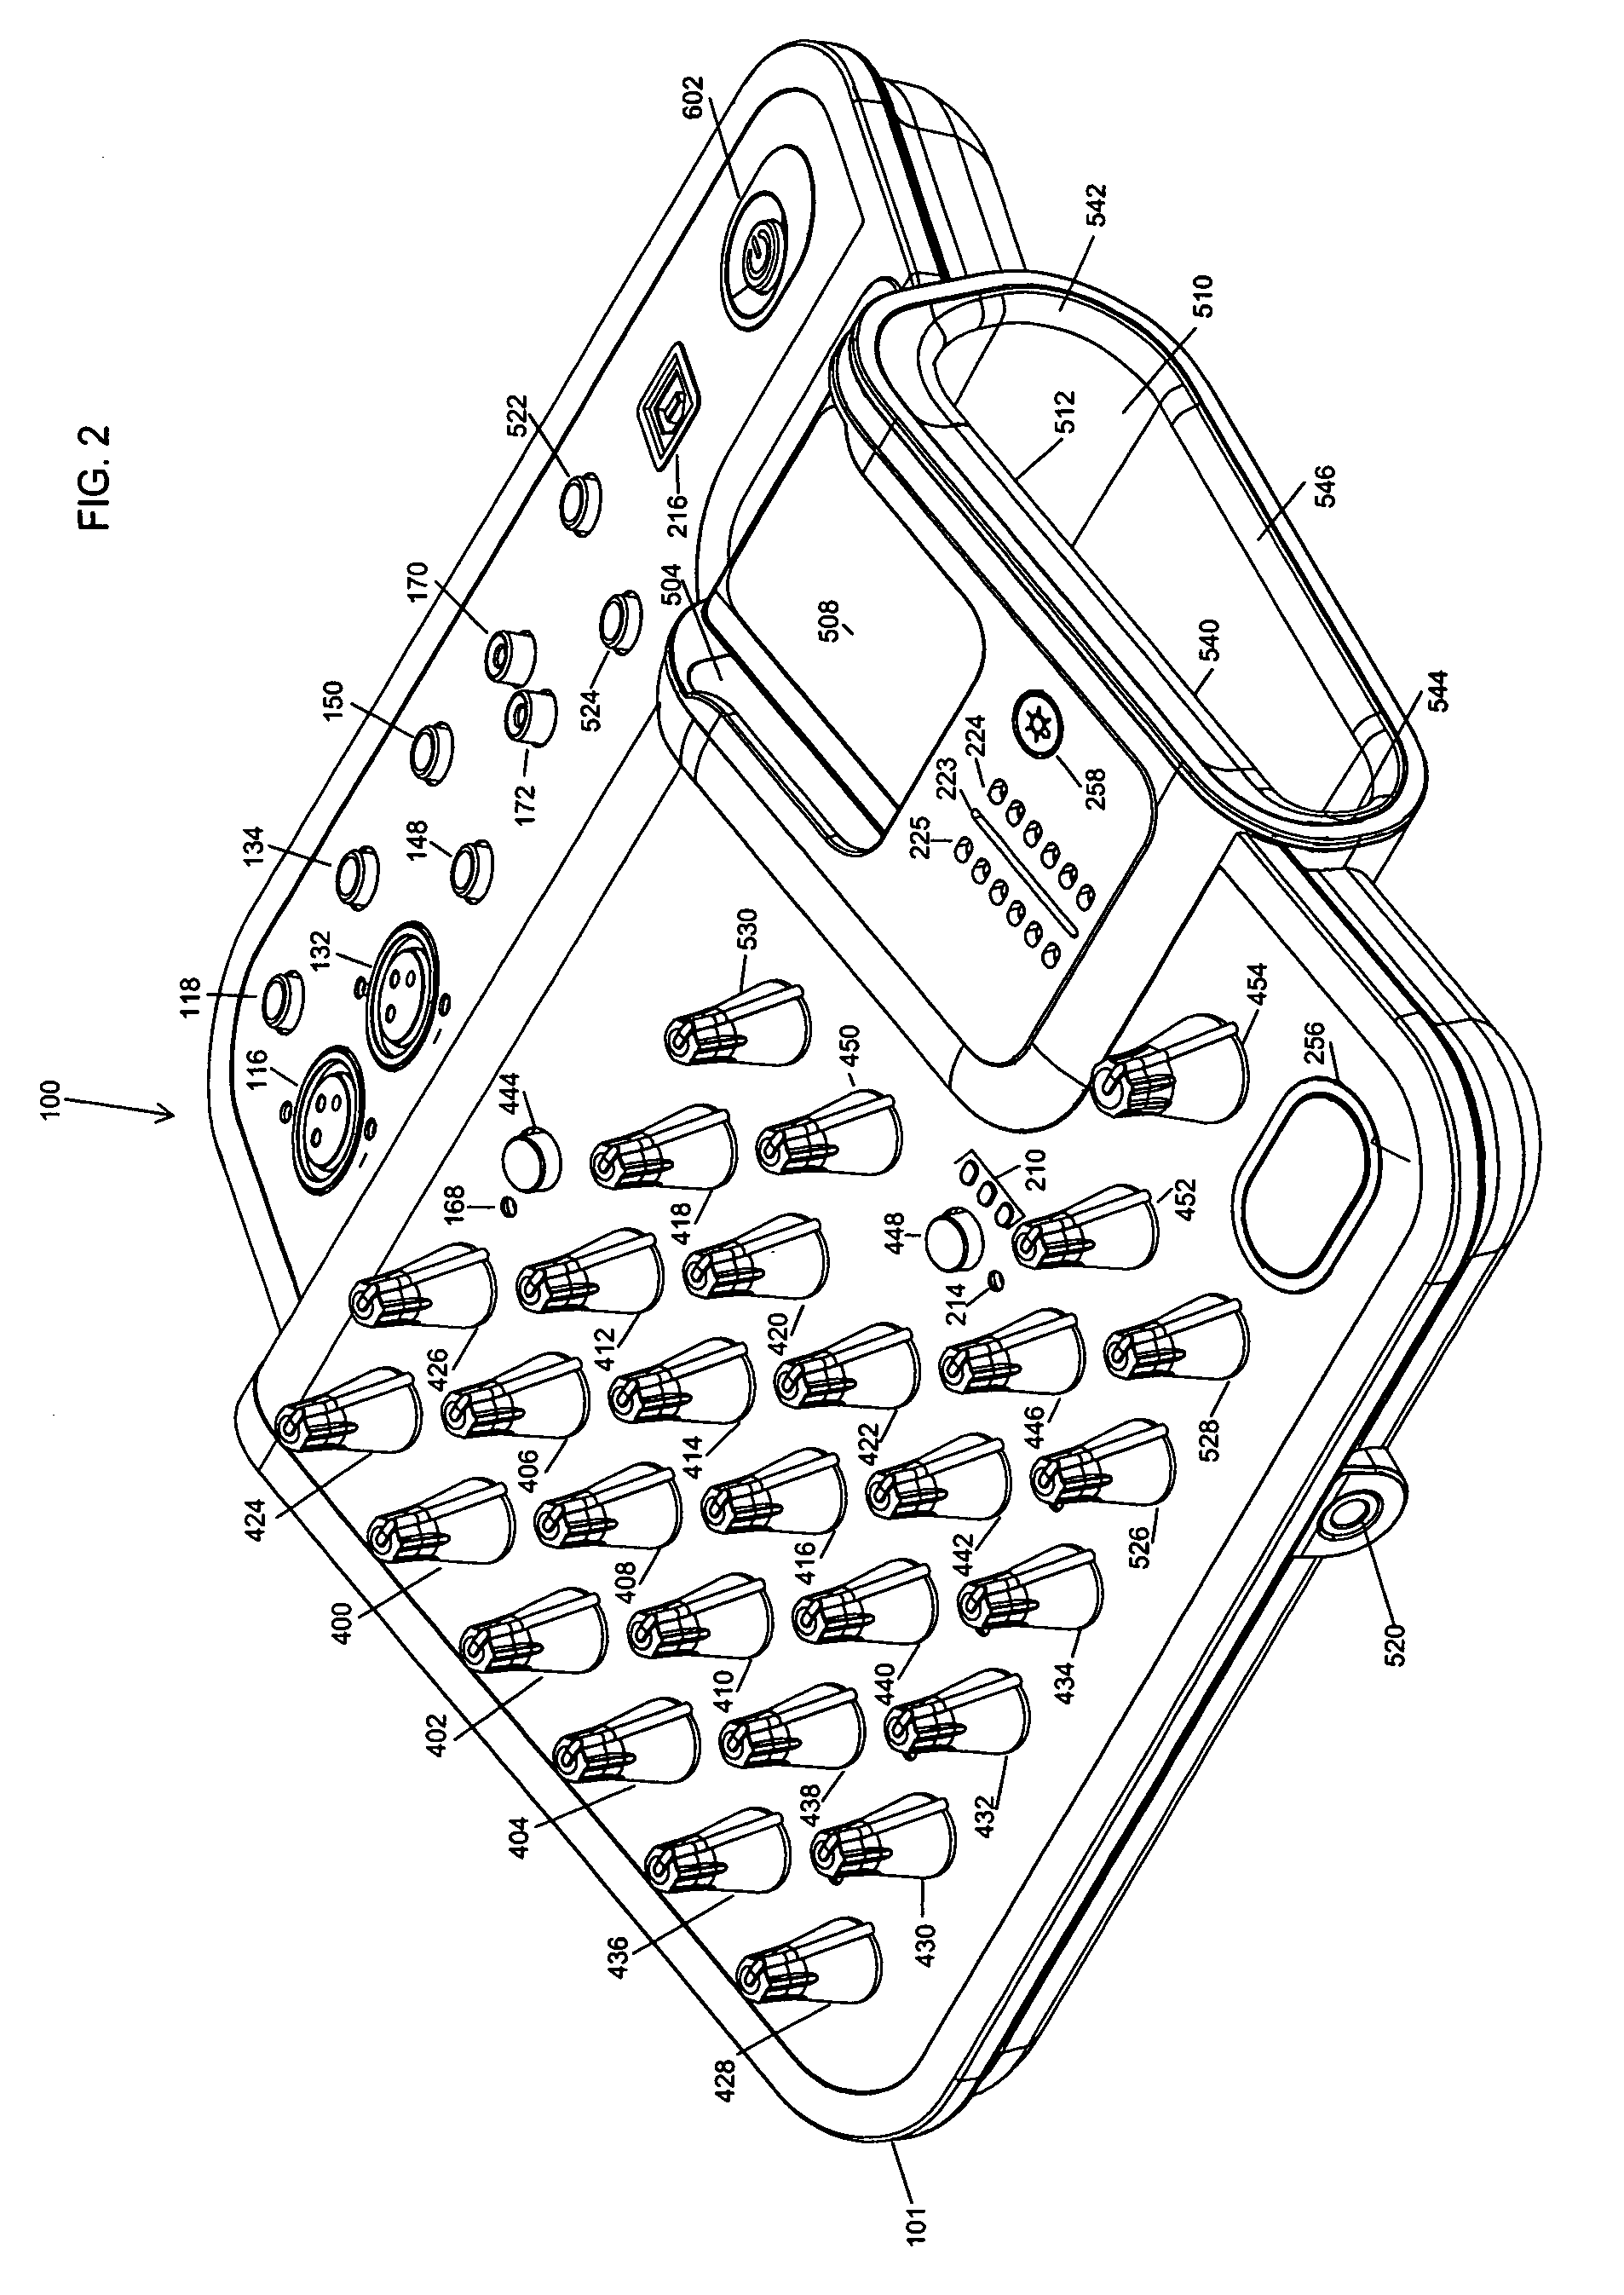 Mixing system for portable media device